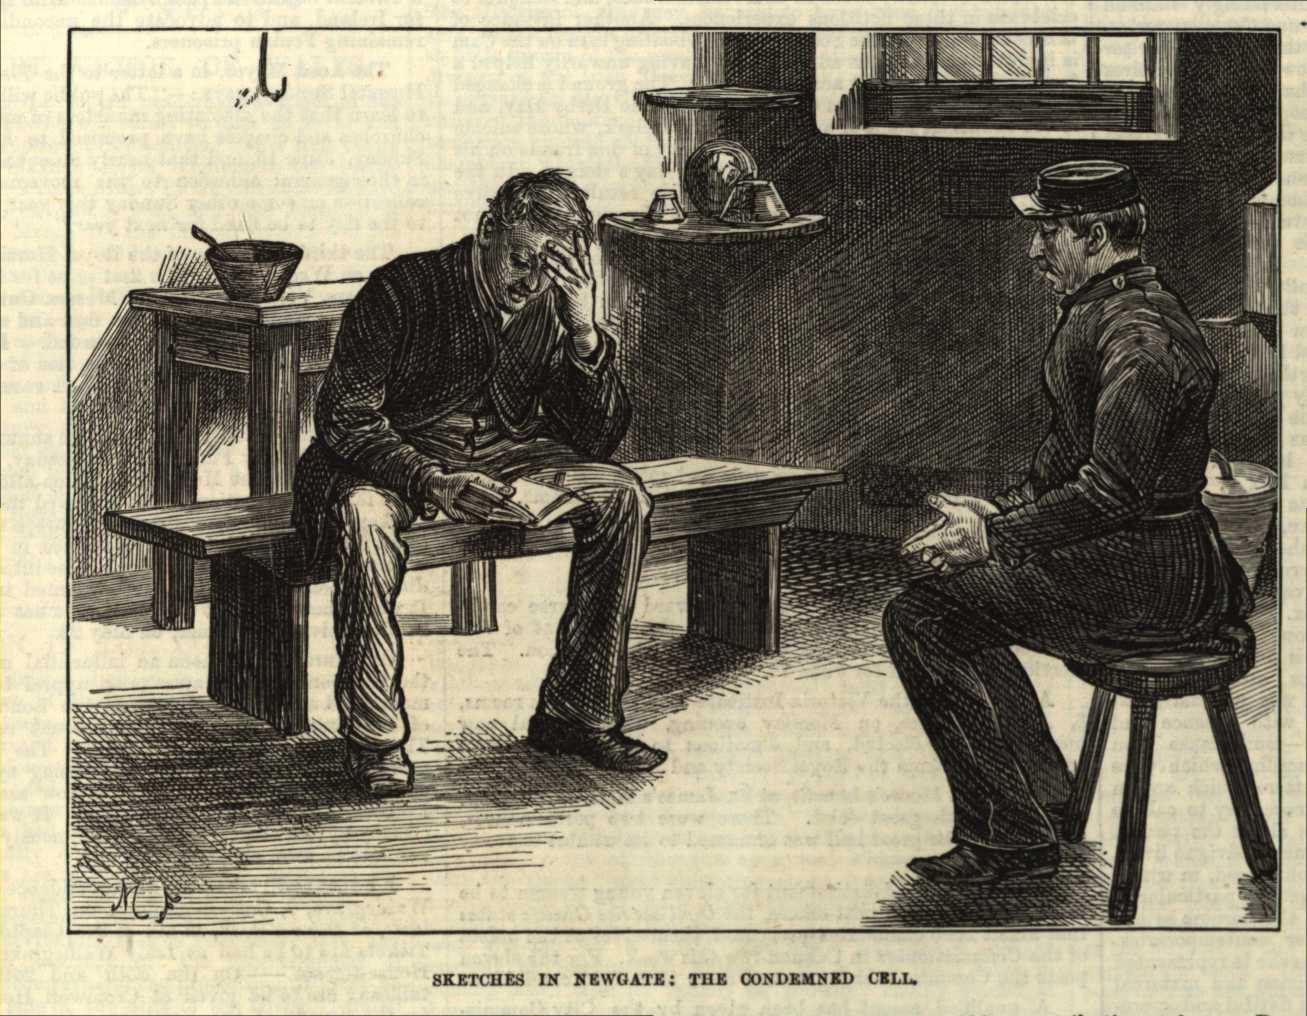 In the condemned cell - ILN 22/03/1873